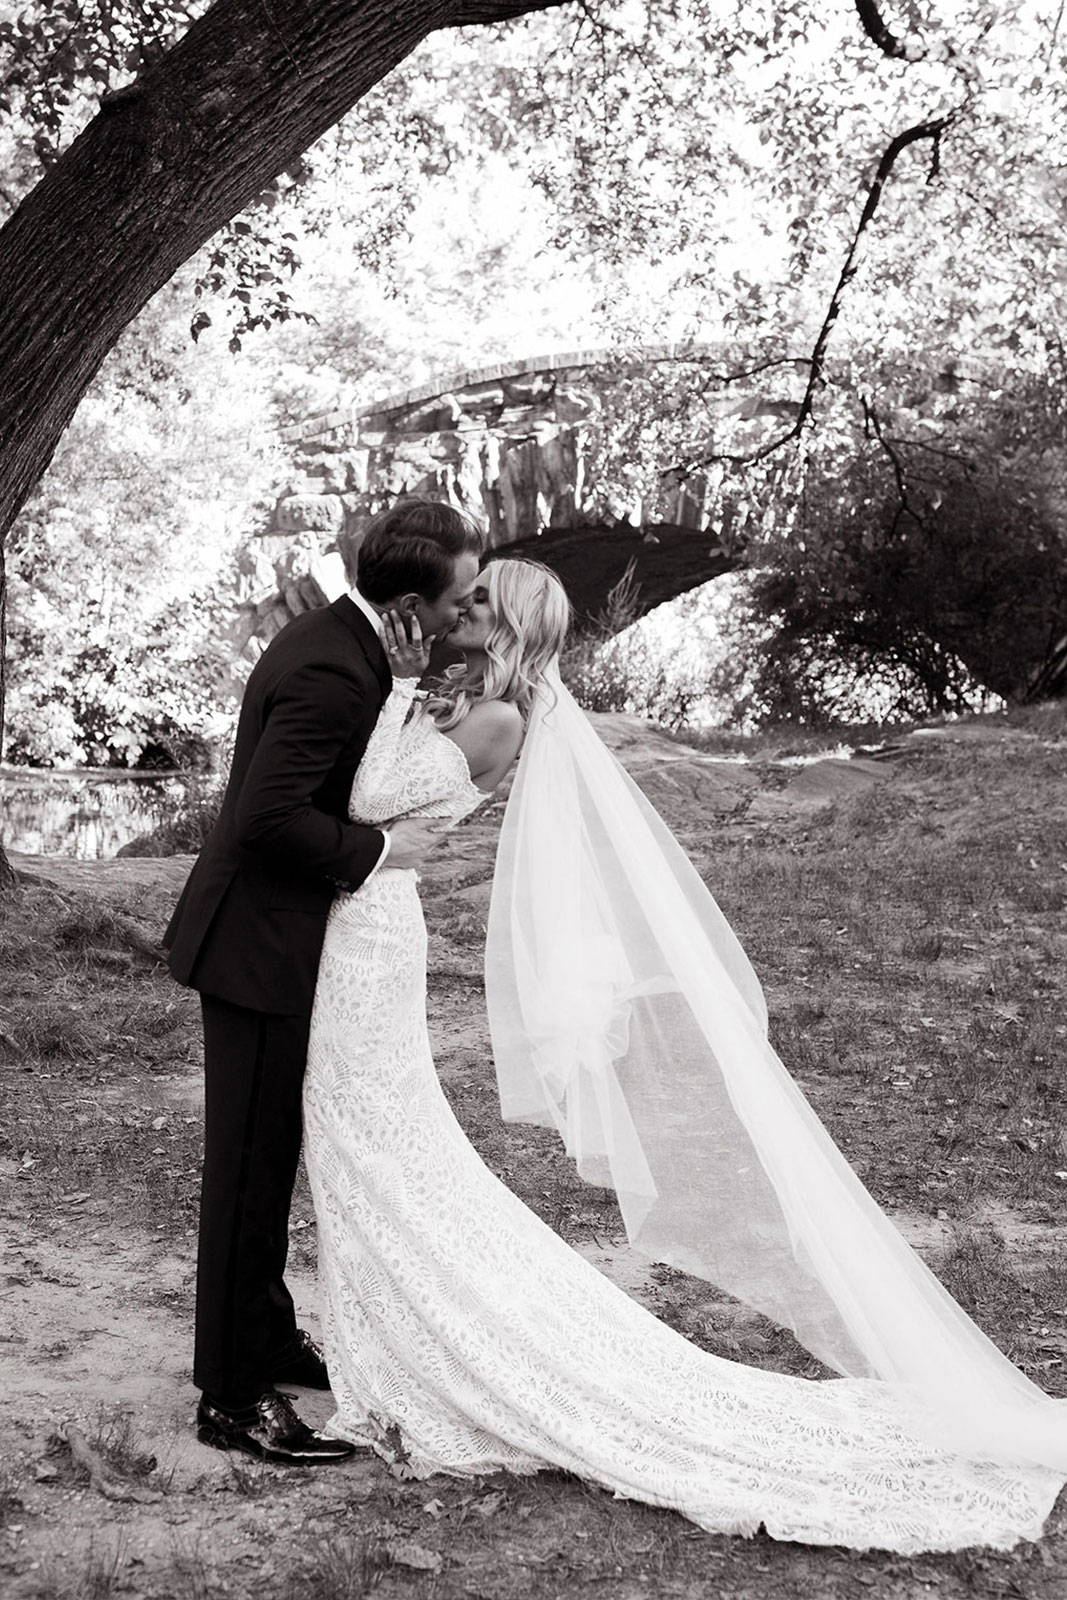 Bride and Groom sharing a kiss in Central Park, NYC